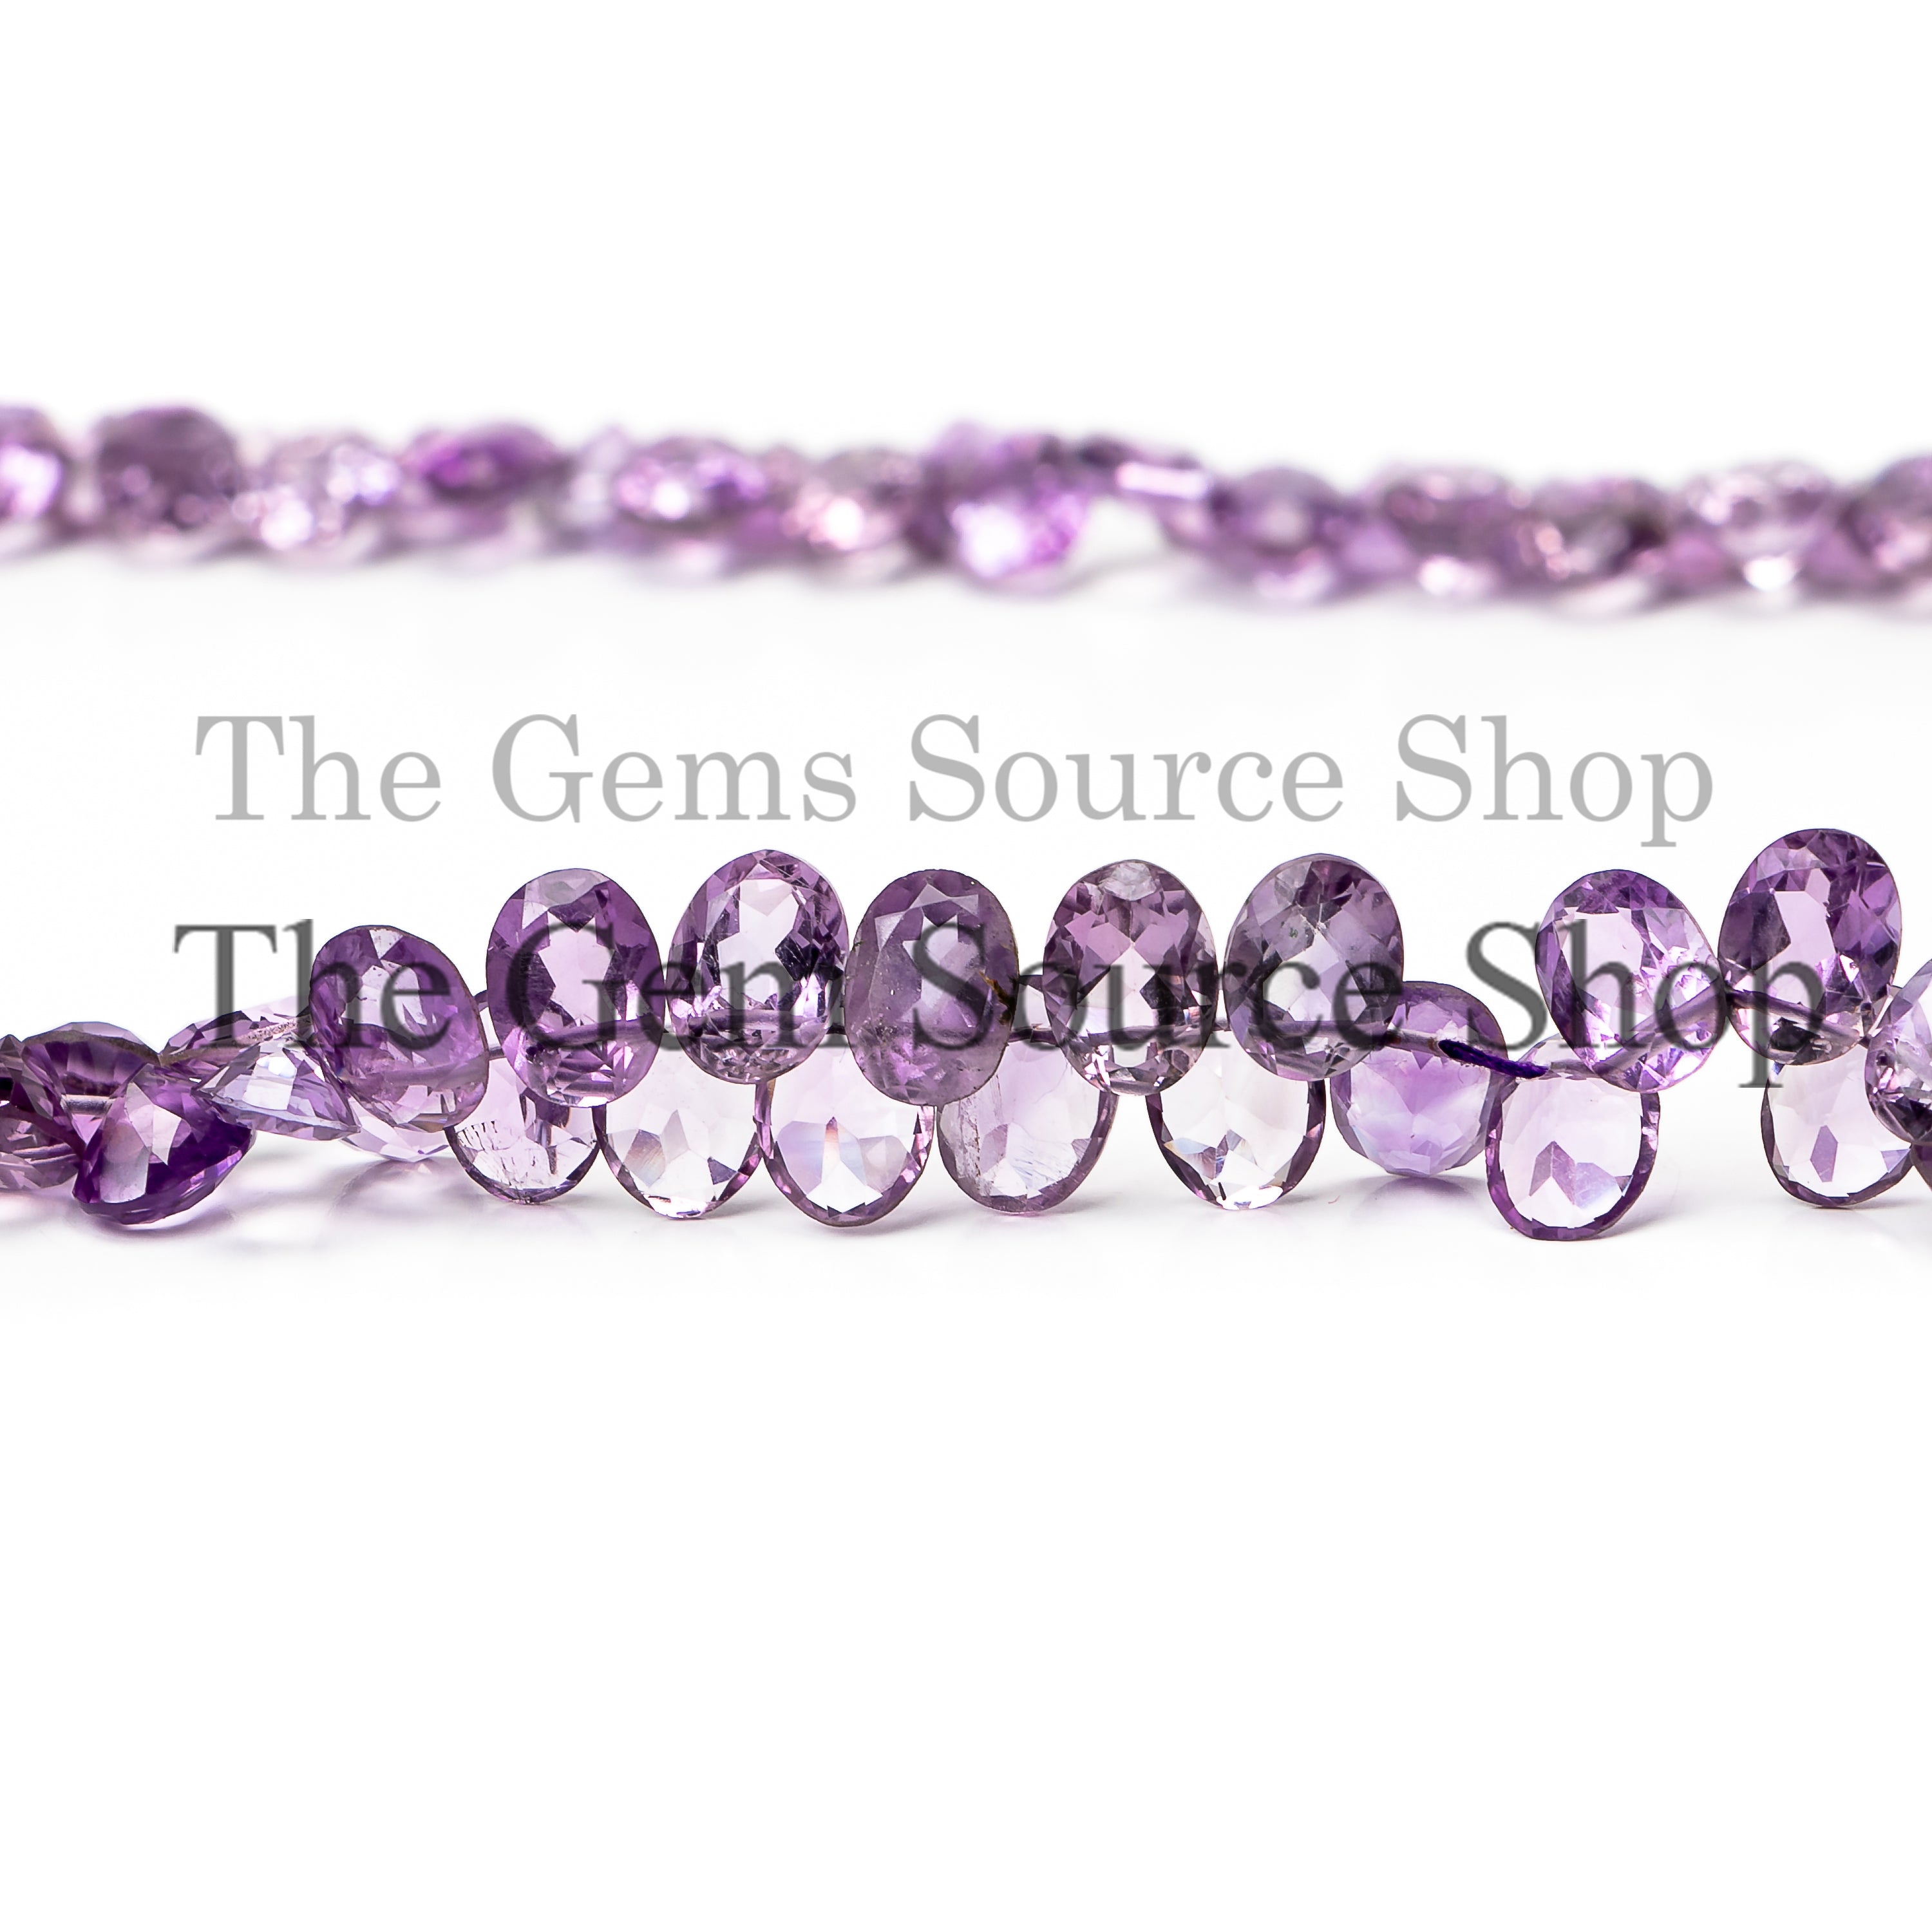 Amethyst Faceted Briolette Cut Oval Shape Gemstone Beads, Faceted Pink Amethyst Beads, Amethyst Oval Beads, Amethyst Briolette